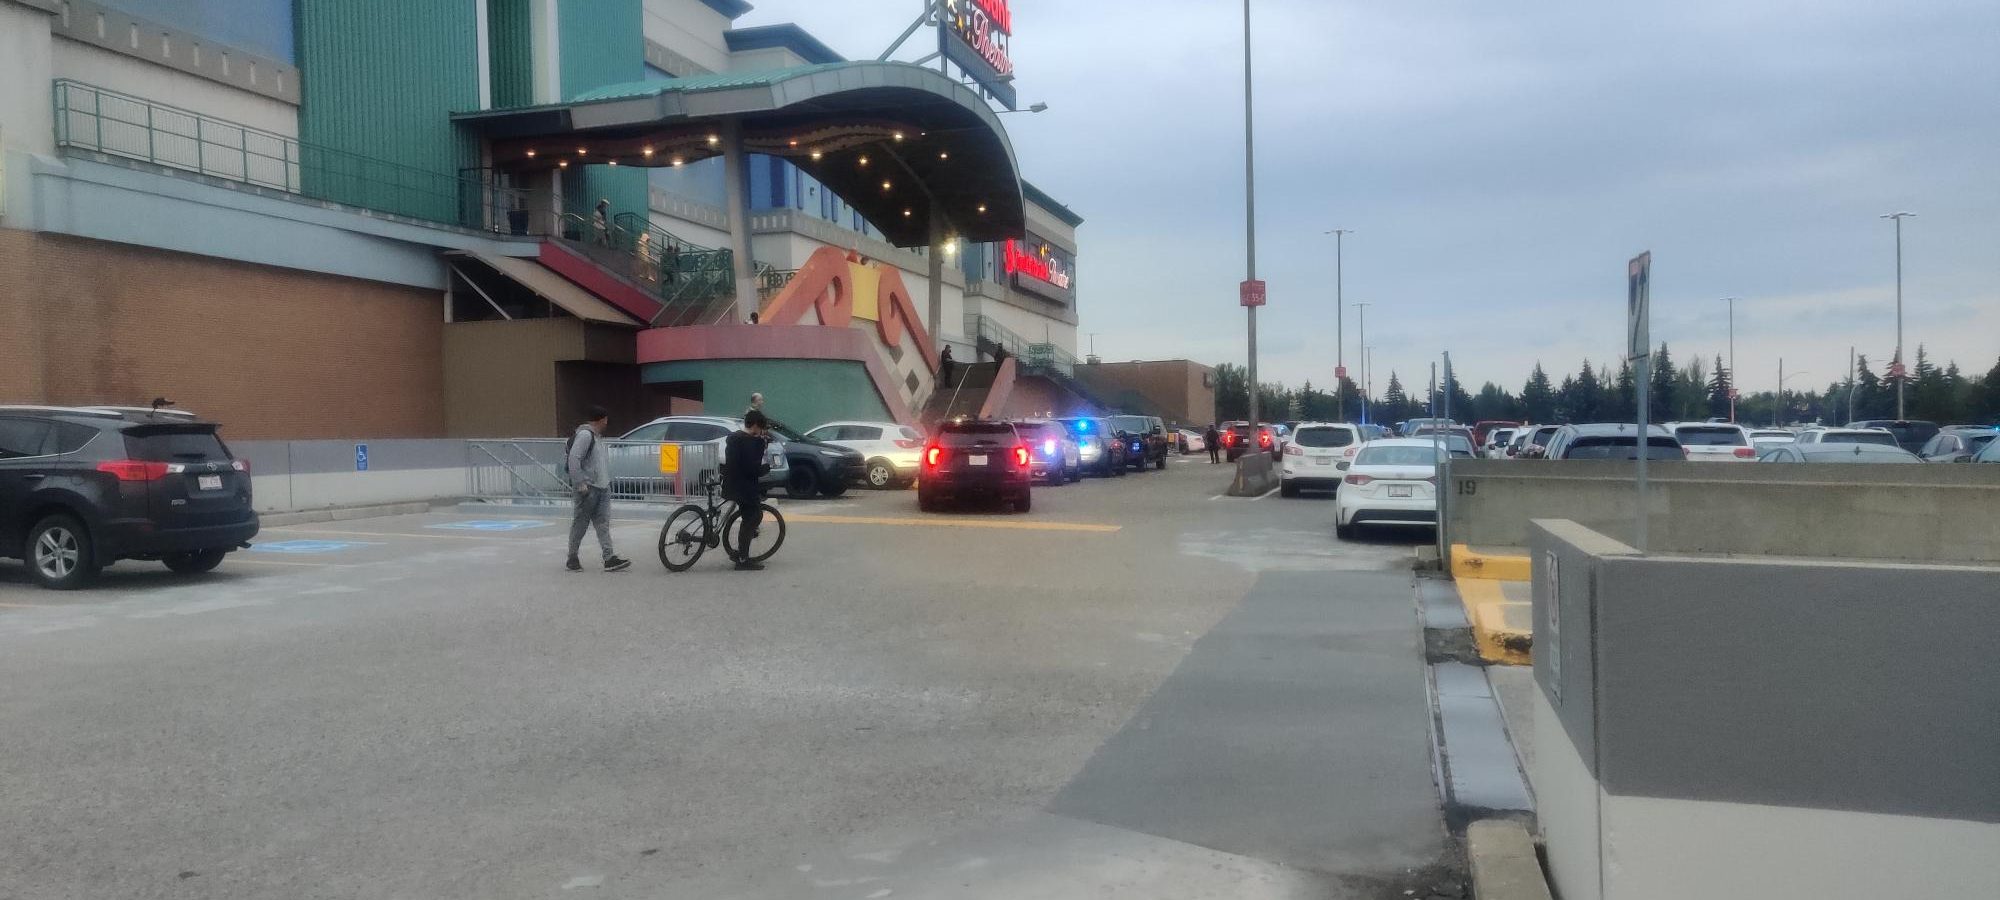 West Edmonton Mall locked down as 3 seriously injured in shooting